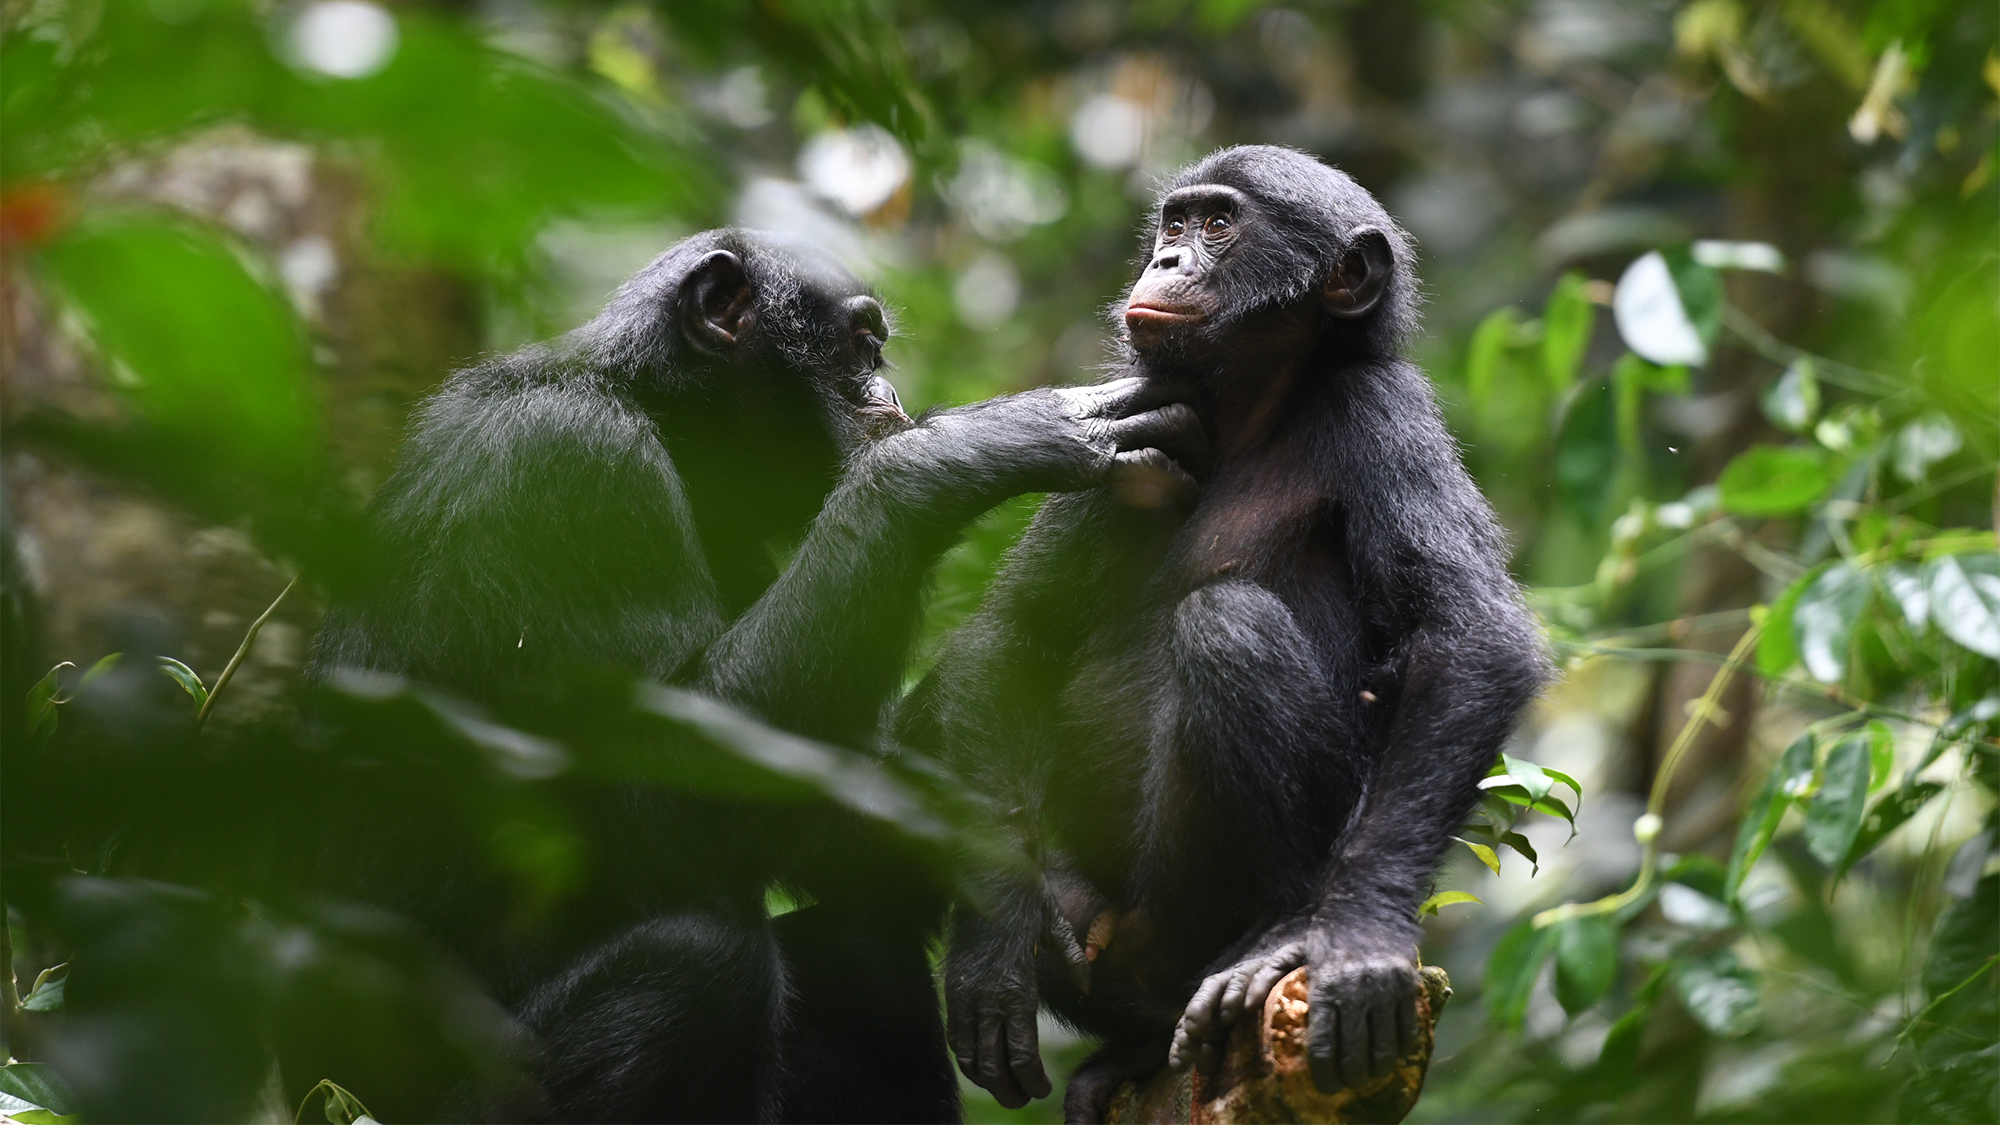 Wild bonobos show surprising signs of cooperation between groups